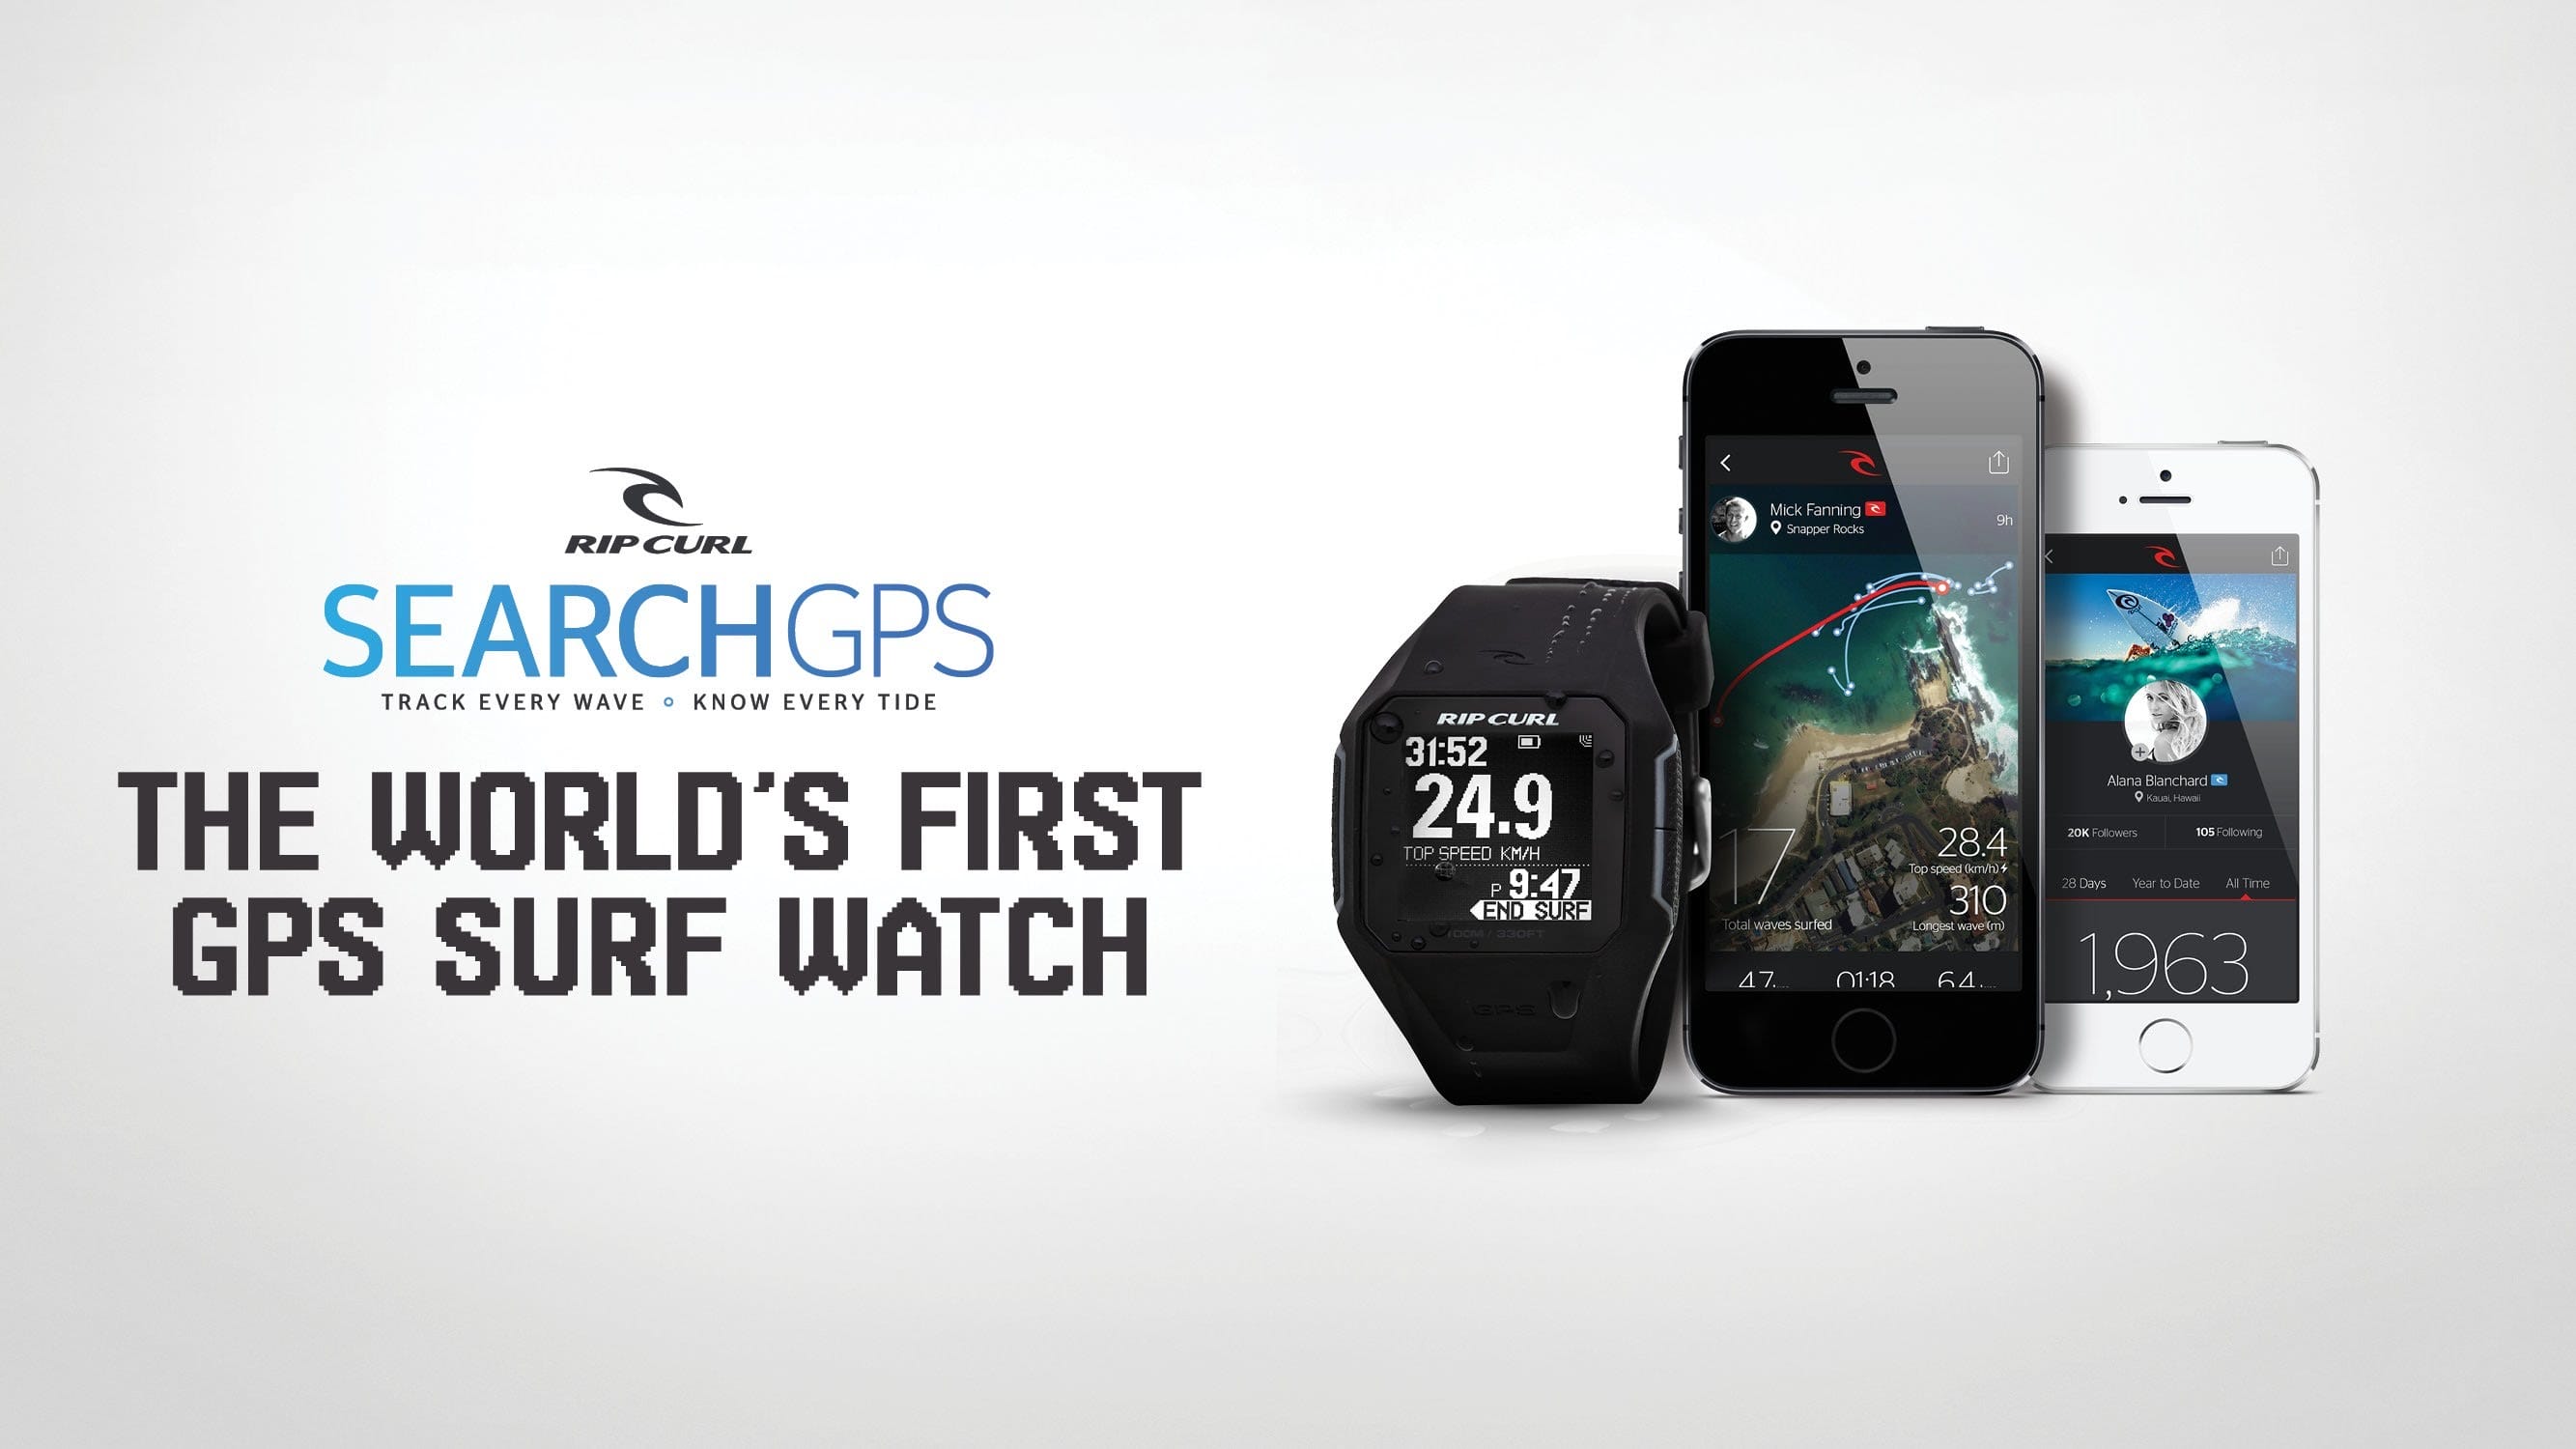 The first Surf GPS watch